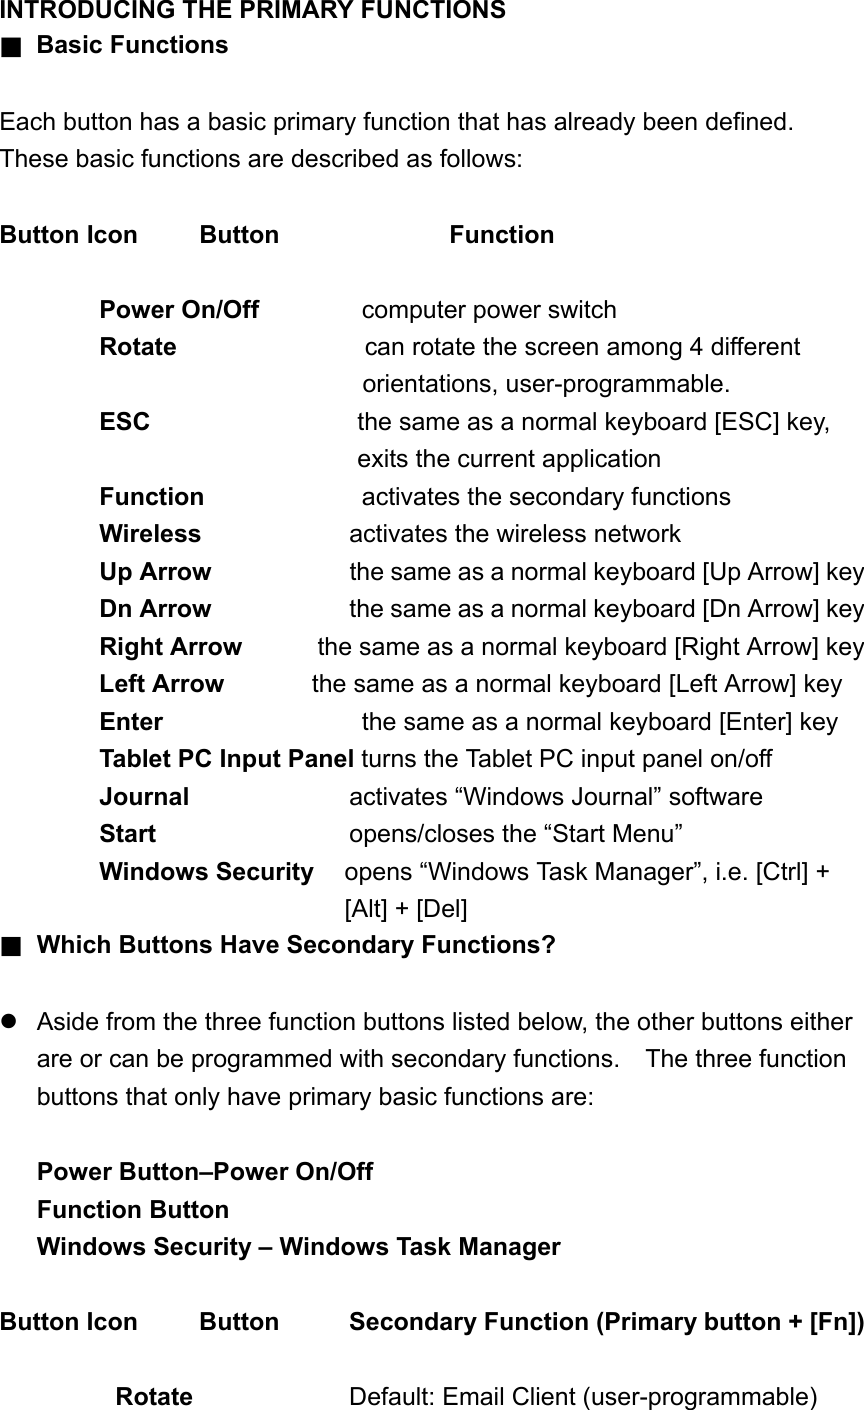 INTRODUCING THE PRIMARY FUNCTIONS ■ Basic Functions  Each button has a basic primary function that has already been defined.   These basic functions are described as follows:  Button Icon  Button    Function  Power On/Off       computer power switch Rotate                can rotate the screen among 4 different orientations, user-programmable. ESC  the same as a normal keyboard [ESC] key, exits the current application     Function    activates the secondary functions Wireless   activates the wireless network Up Arrow  the same as a normal keyboard [Up Arrow] key Dn Arrow         the same as a normal keyboard [Dn Arrow] key Right Arrow      the same as a normal keyboard [Right Arrow] key   Left Arrow     the same as a normal keyboard [Left Arrow] key Enter            the same as a normal keyboard [Enter] key Tablet PC Input Panel turns the Tablet PC input panel on/off Journal            activates “Windows Journal” software   Start          opens/closes the “Start Menu” Windows Security  opens “Windows Task Manager”, i.e. [Ctrl] + [Alt] + [Del] ■ Which Buttons Have Secondary Functions?   Aside from the three function buttons listed below, the other buttons either are or can be programmed with secondary functions.    The three function buttons that only have primary basic functions are:  Power Button–Power On/Off Function Button Windows Security – Windows Task Manager  Button Icon    Button     Secondary Function (Primary button + [Fn])  Rotate    Default: Email Client (user-programmable) 